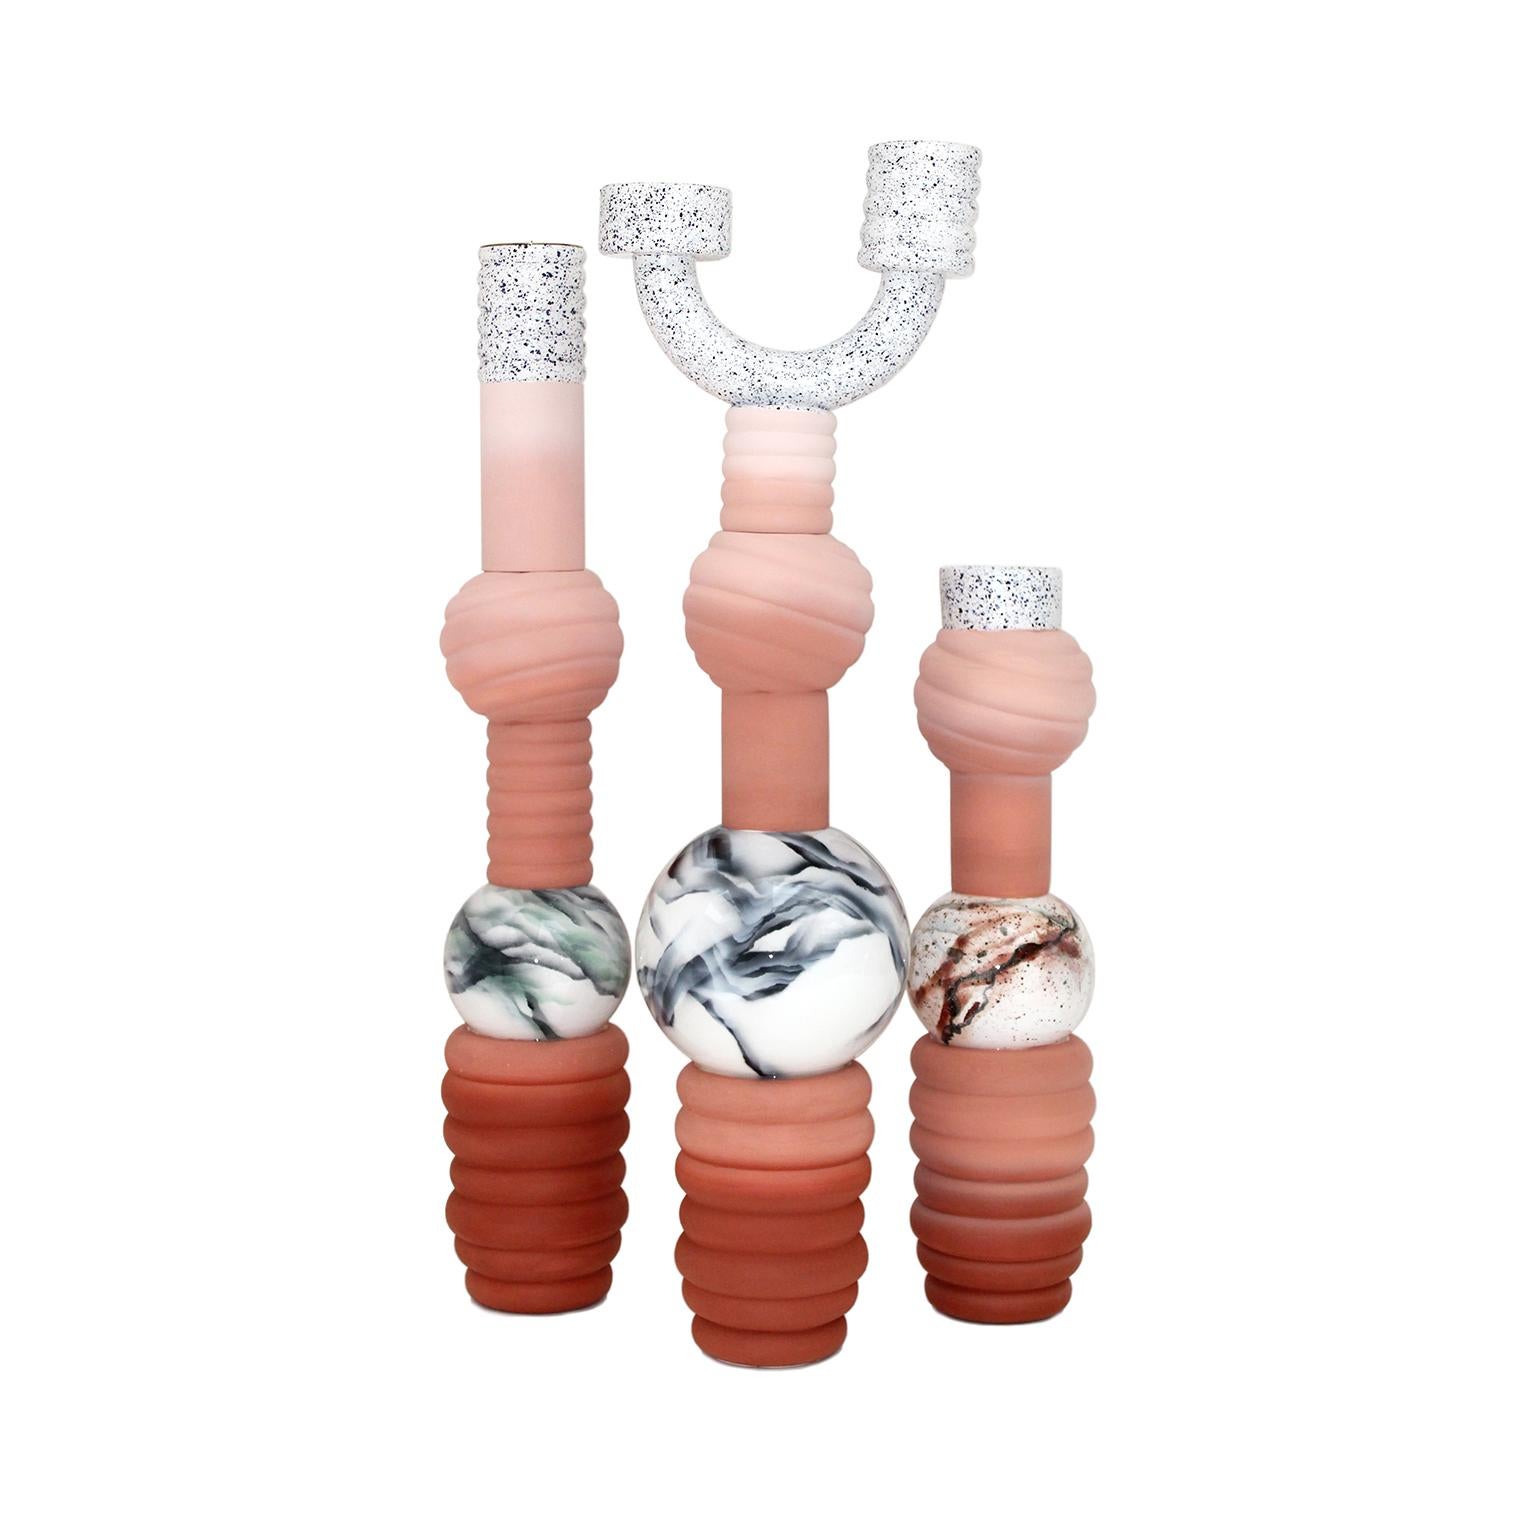 Contemporary 'Nyx 2' candelabra hand crafted ceramic by Villa Arev for French Cliché. This is Presented by French Cliché

Playing with tradition Villa Arev’s Candlelabras are a remake of French church’s and family houses’ imposing